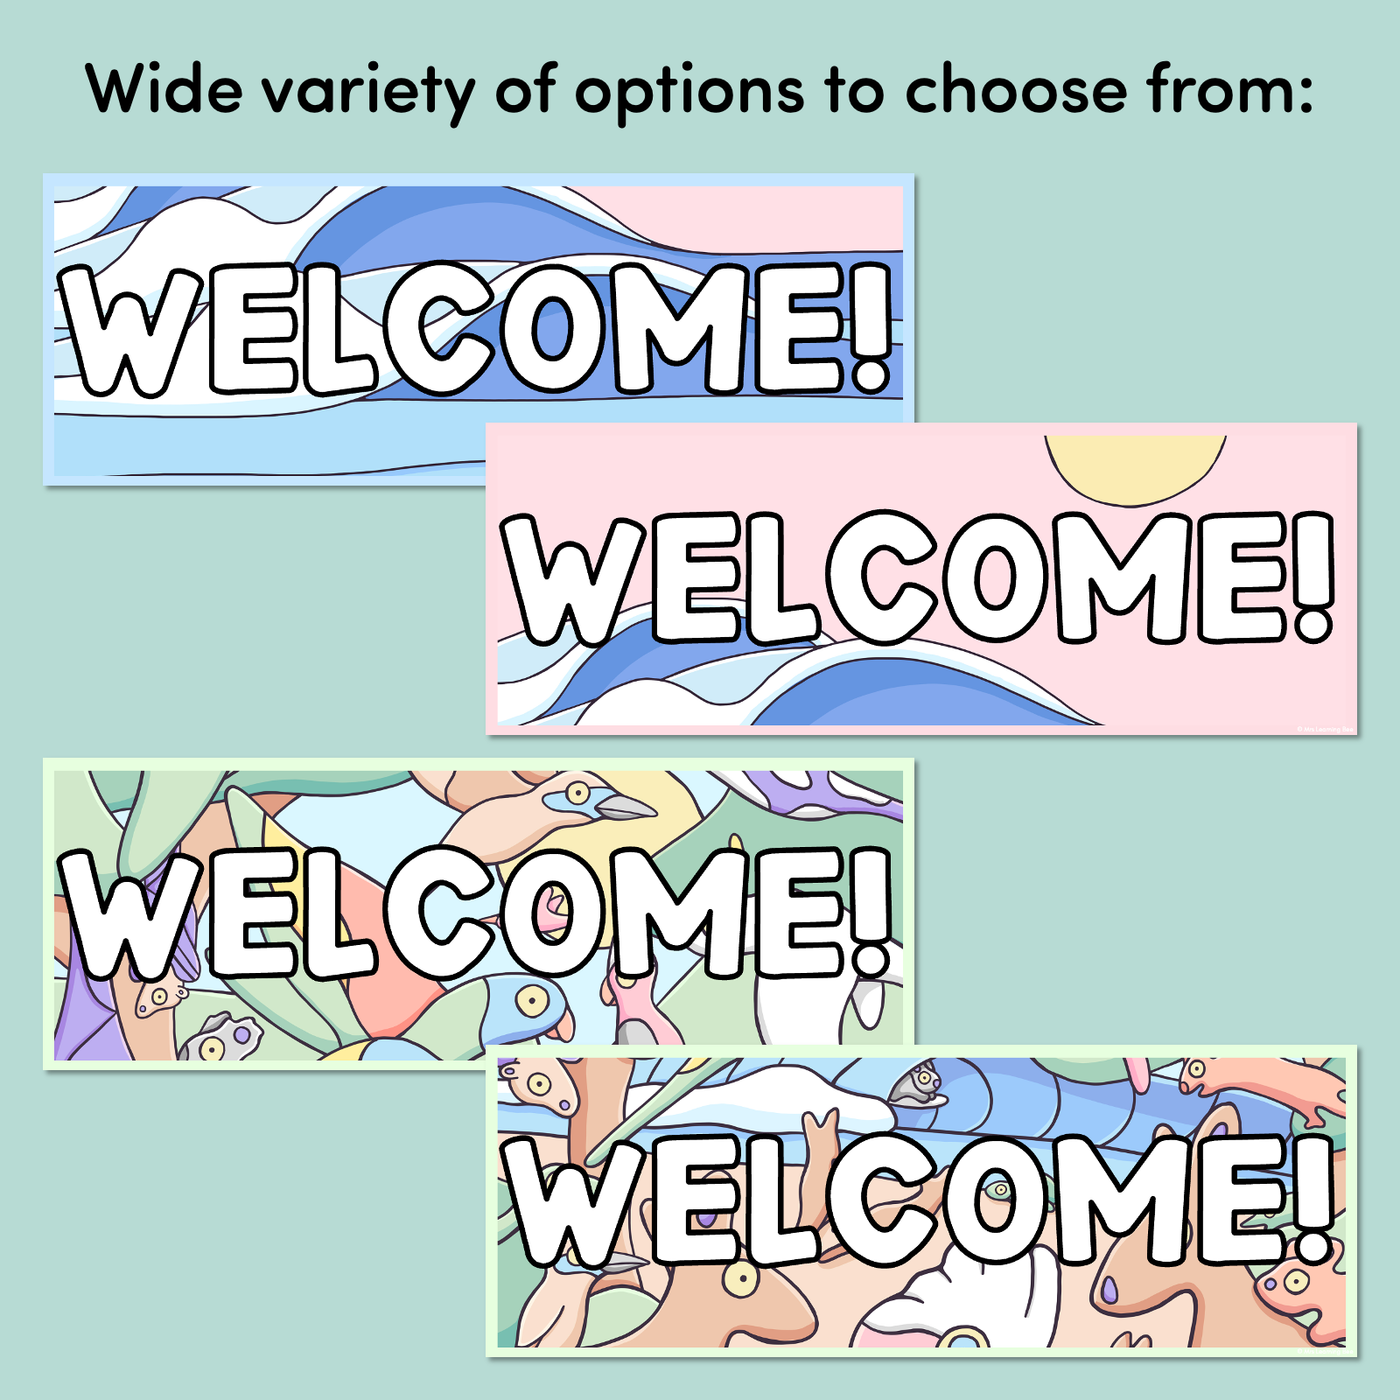 WELCOME SIGNS & BANNERS - The Brentos Collection